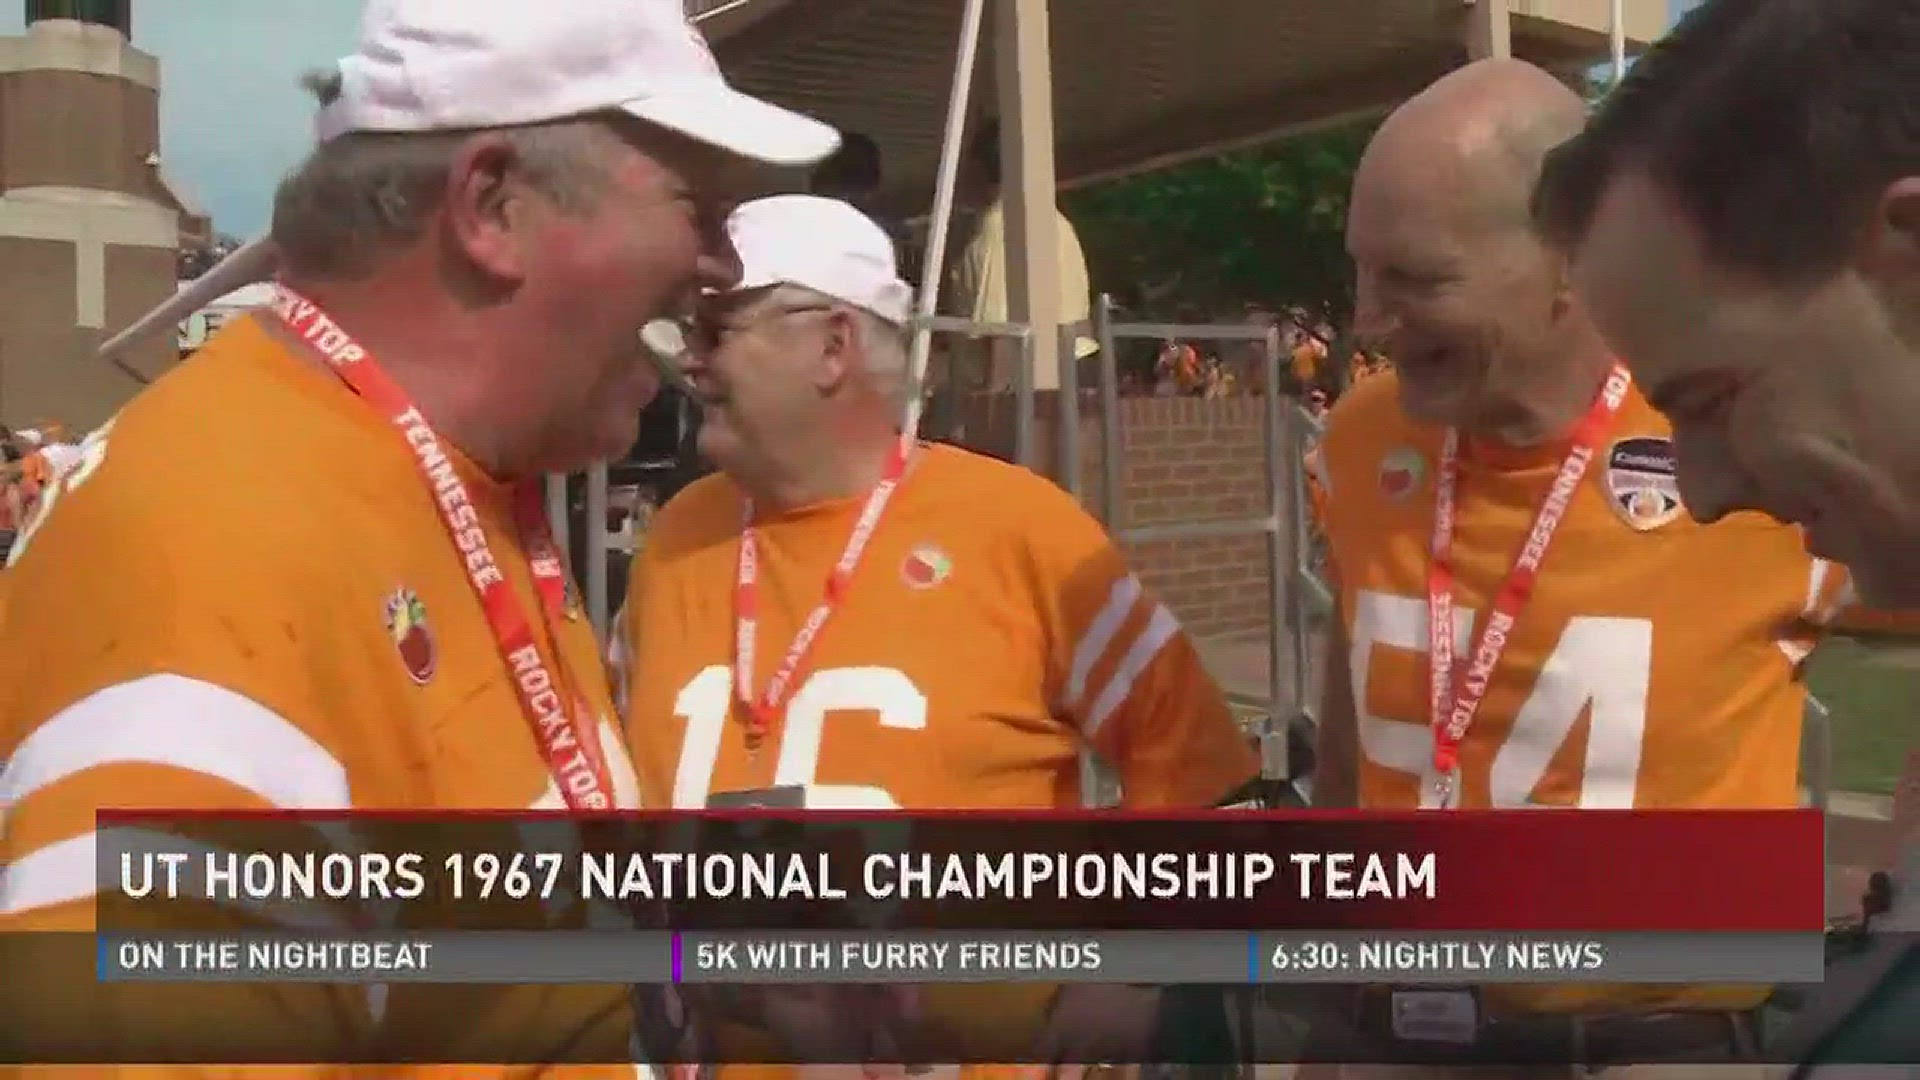 UT honors 1967 championship team Saturday afternoon.